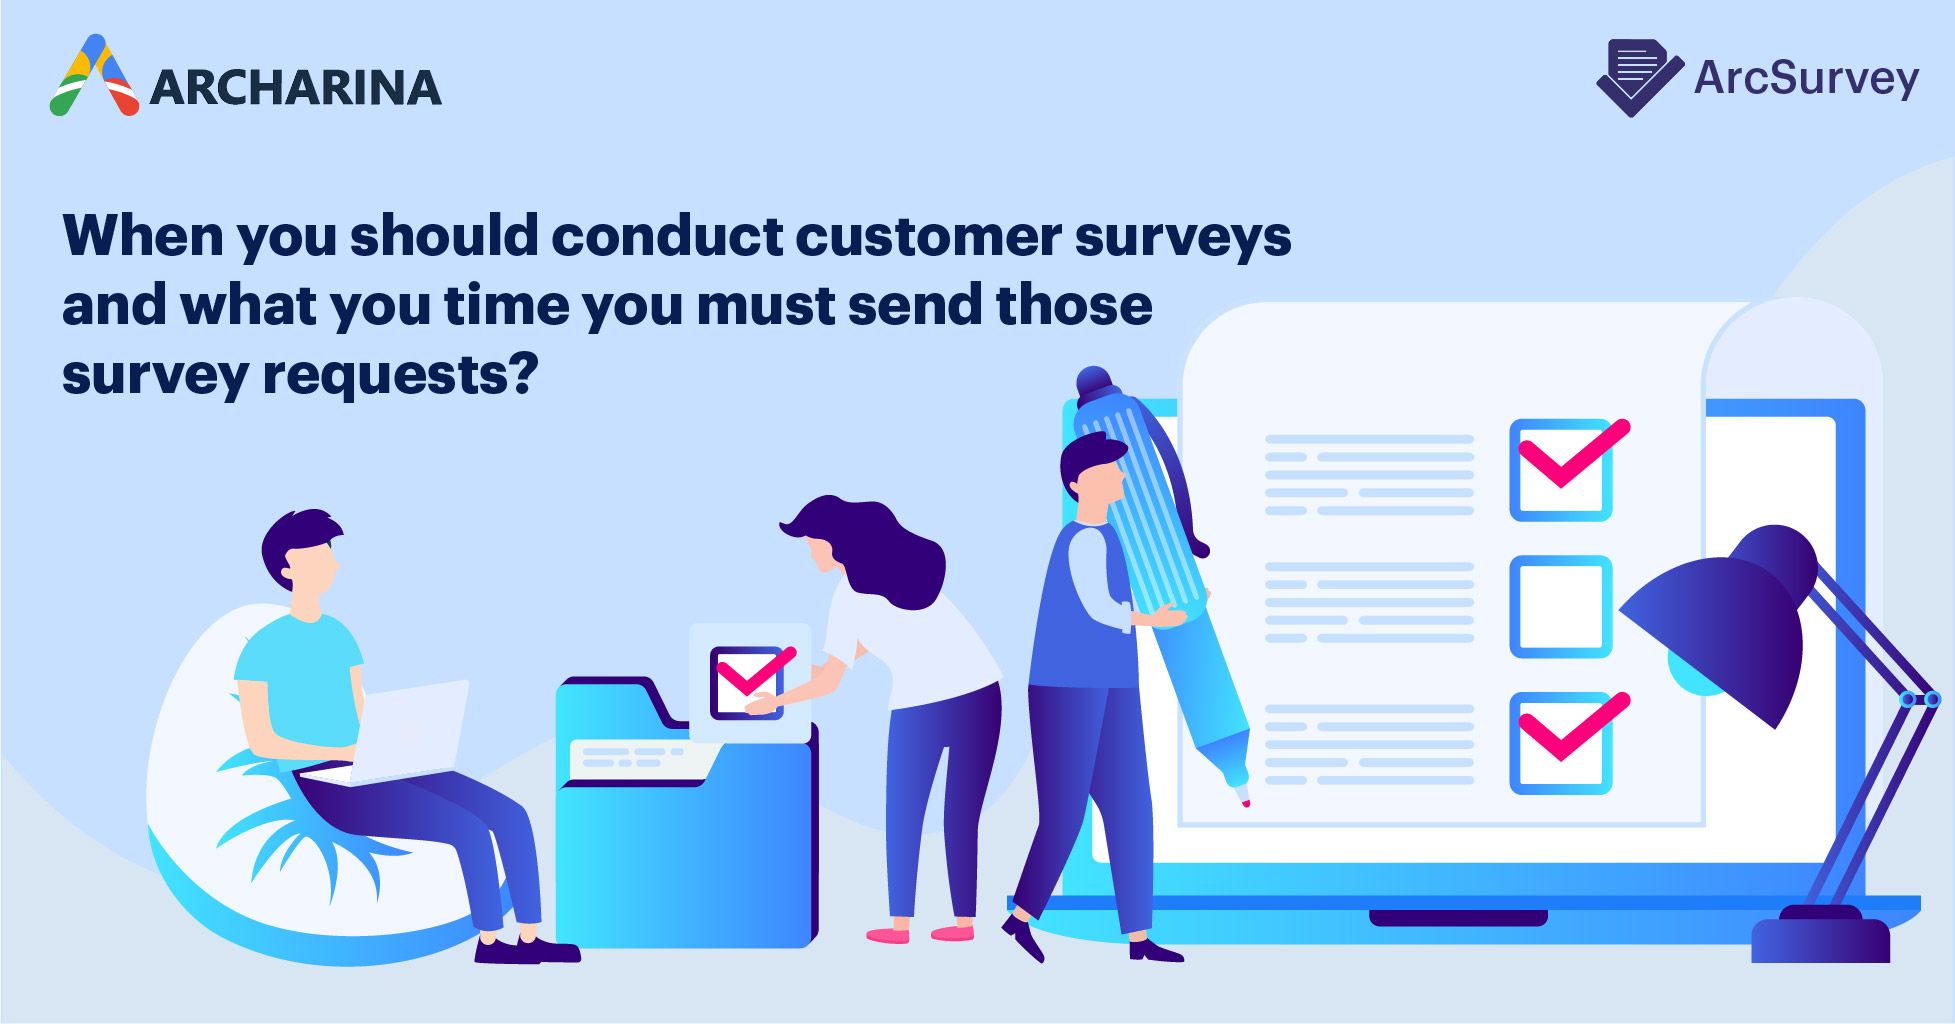 When you should conduct customer surveys and what you time you must send those survey requests